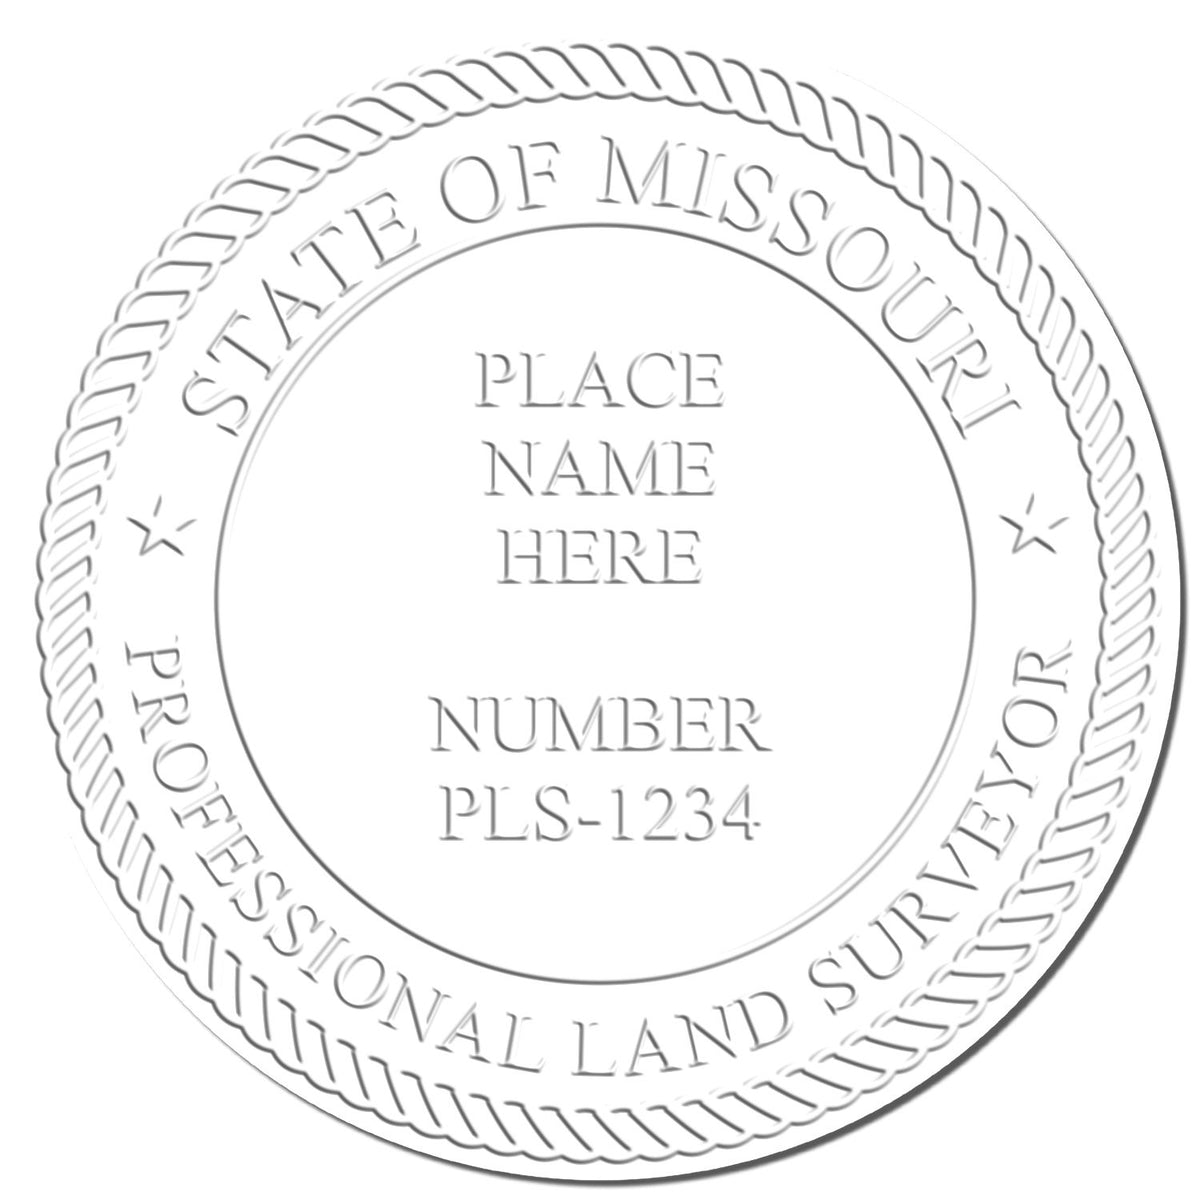 This paper is stamped with a sample imprint of the Handheld Missouri Land Surveyor Seal, signifying its quality and reliability.